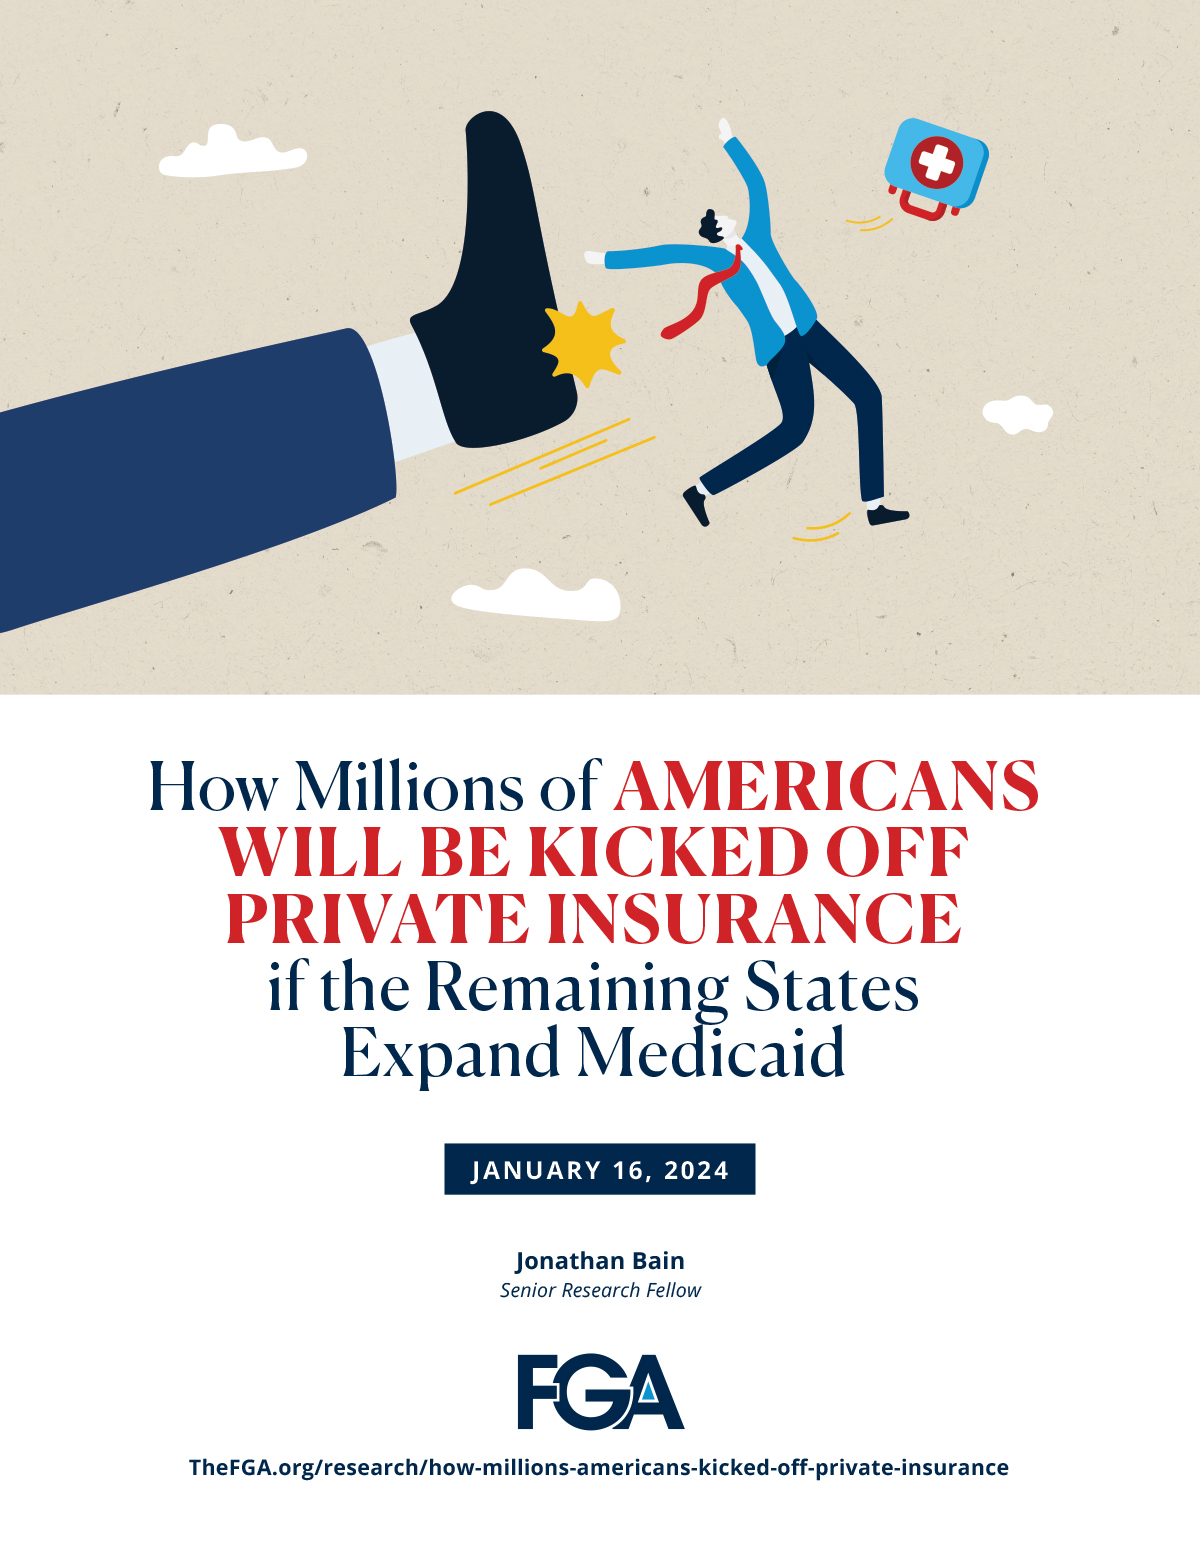 How Millions of Americans Will Be Kicked Off Private Insurance if the Remaining States Expand Medicaid